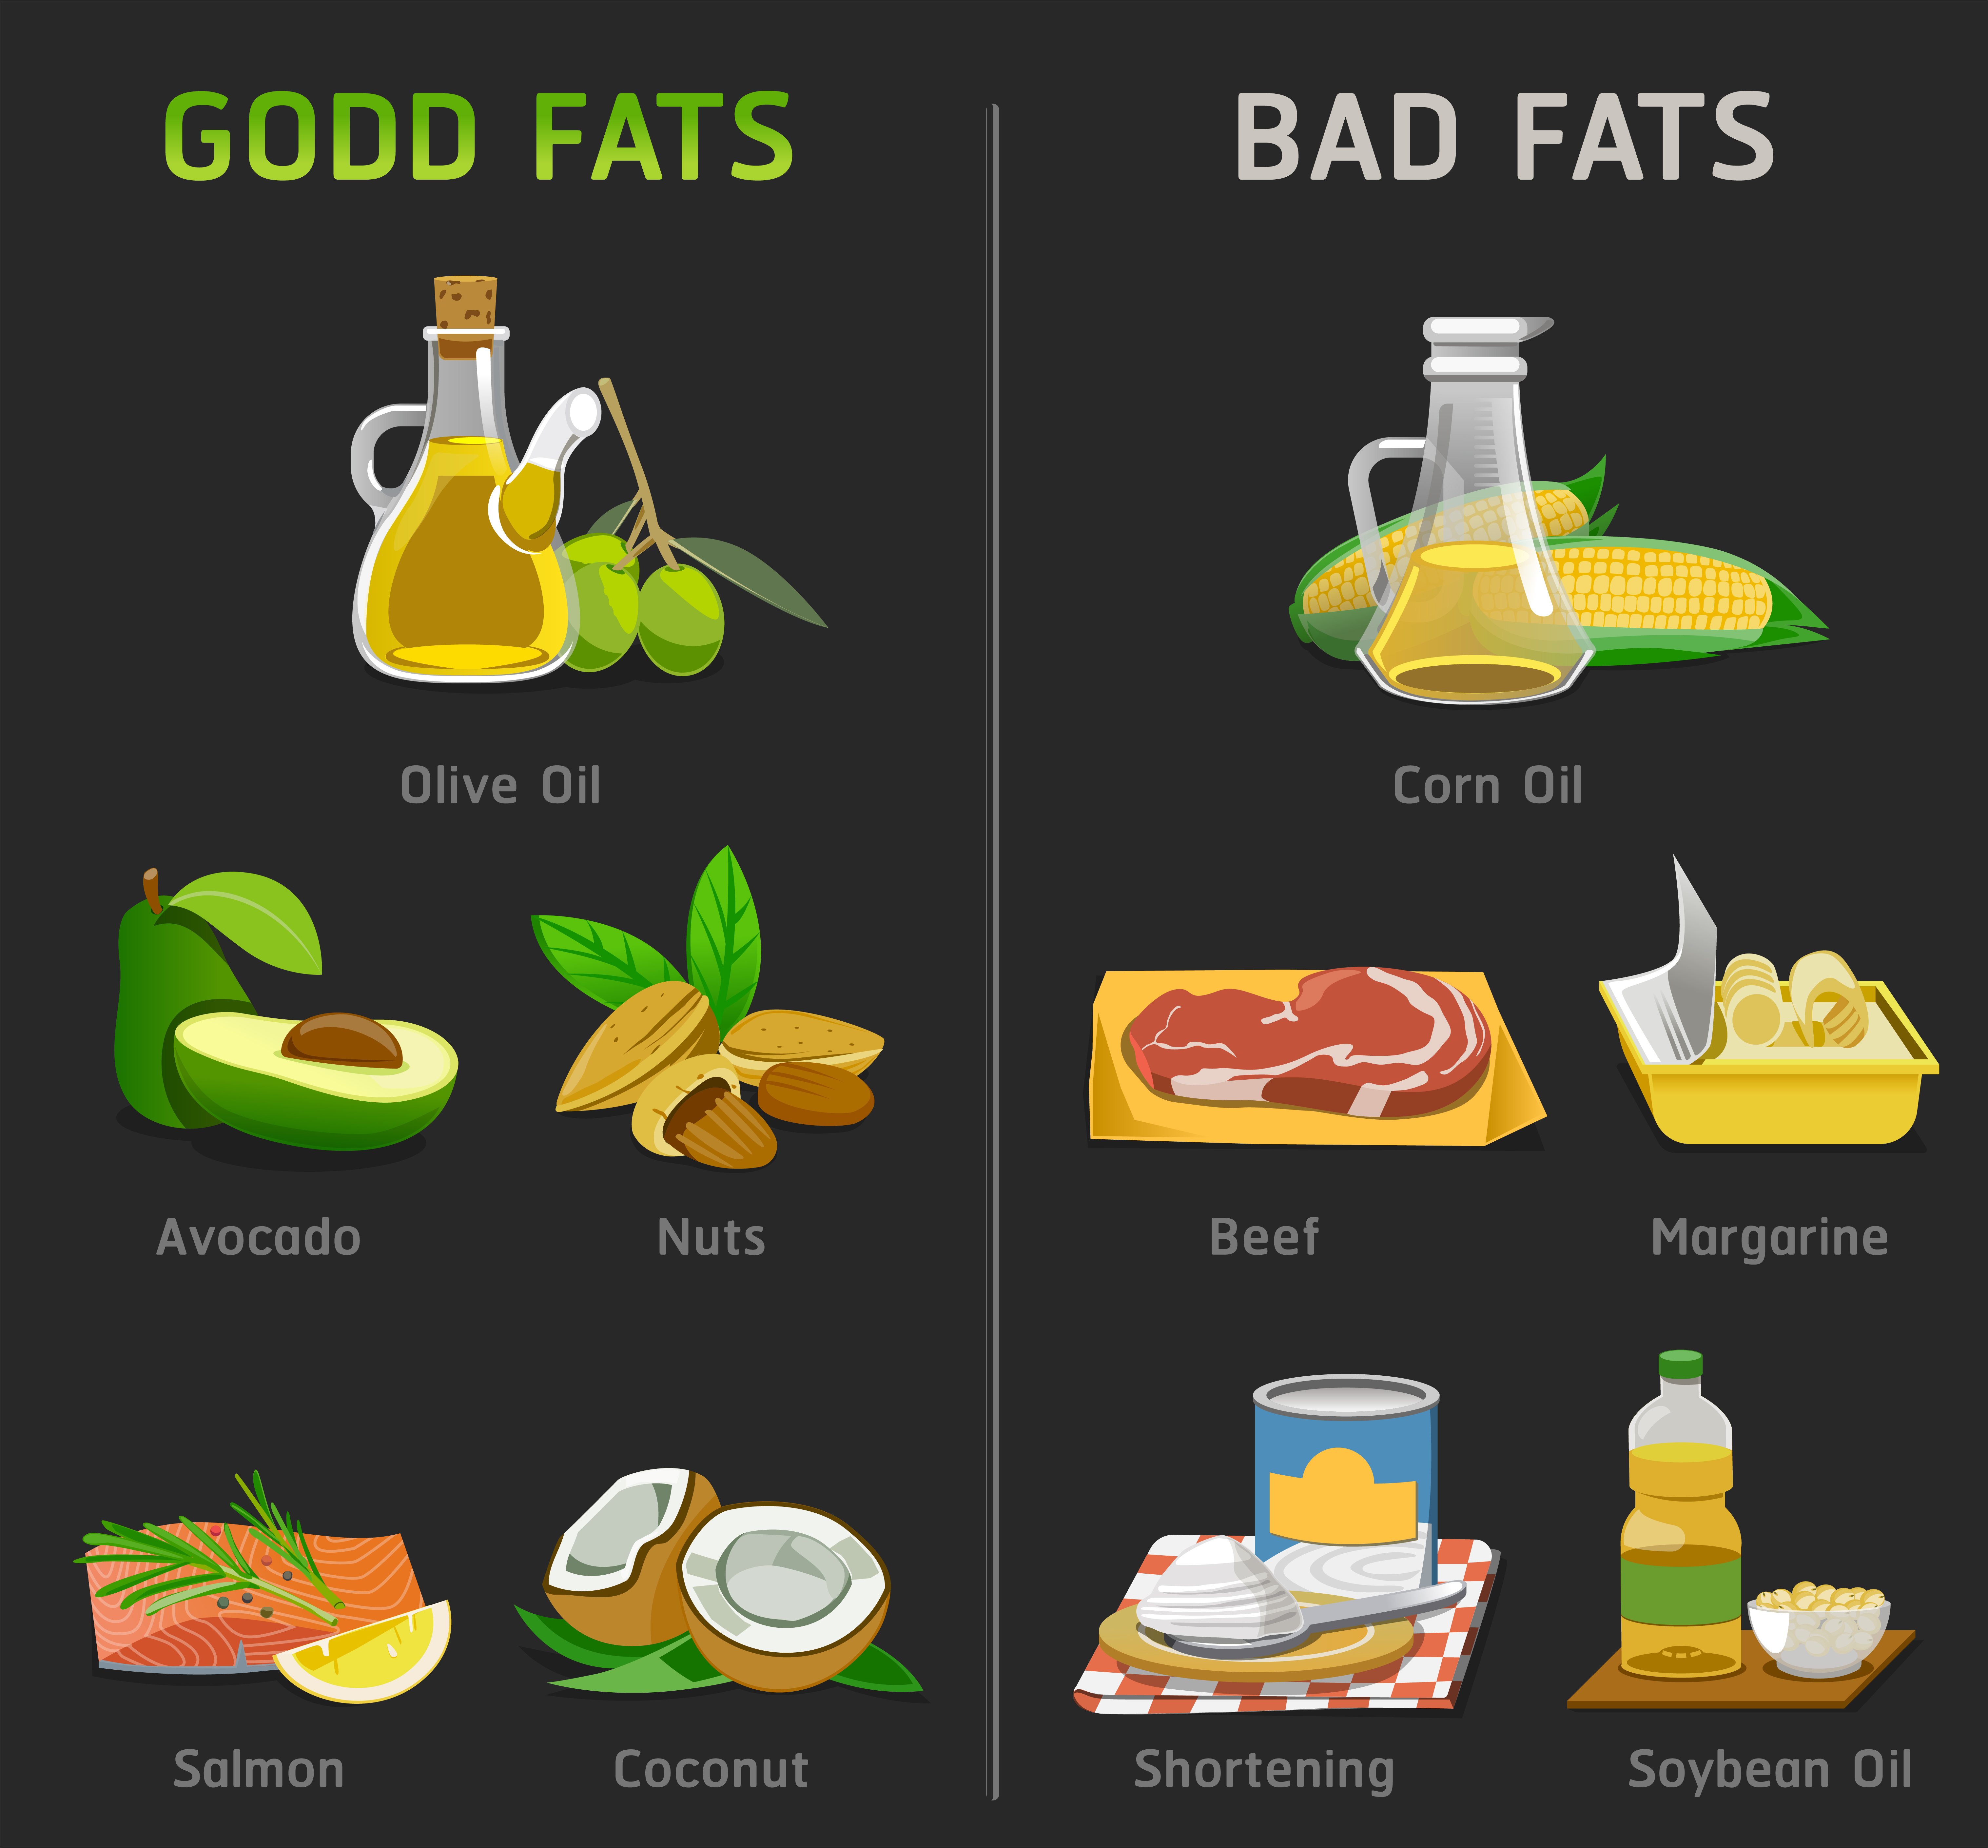 Briefly, we can group fats in two groups - good fats, containing mainly unsaturated fatty acids, and bad fats - mainly trans and saturated fats!